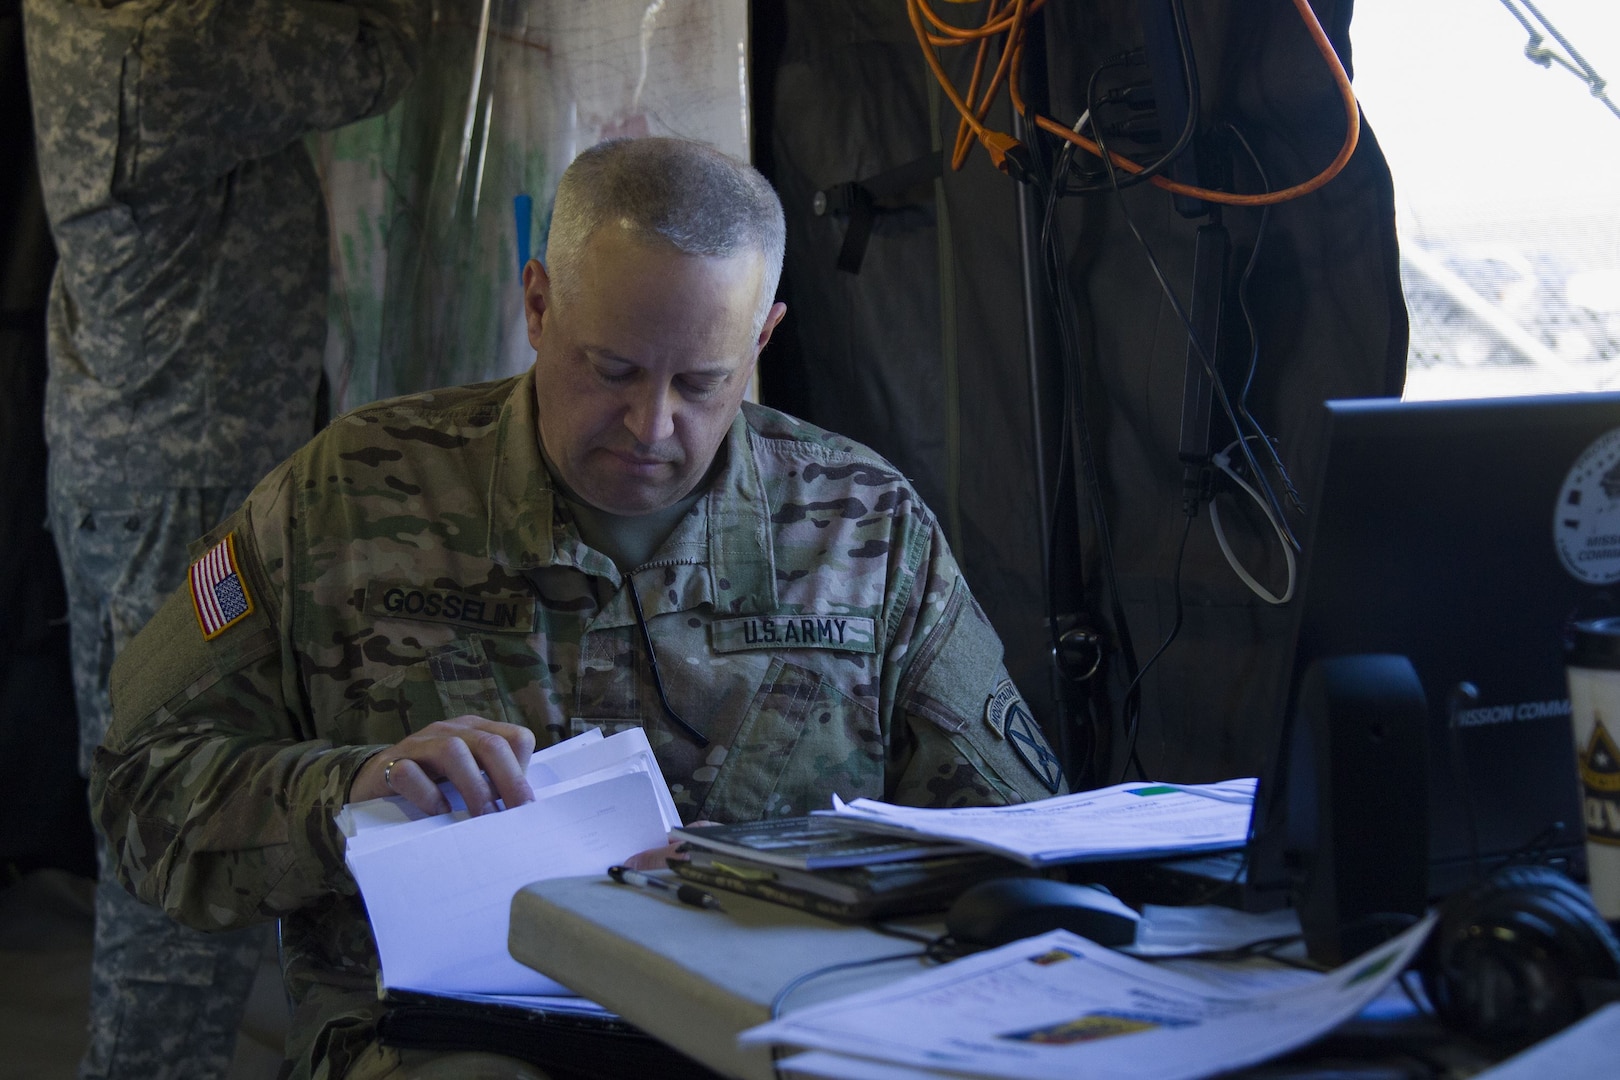 572nd Brigade Engineer Battalion's first exercise